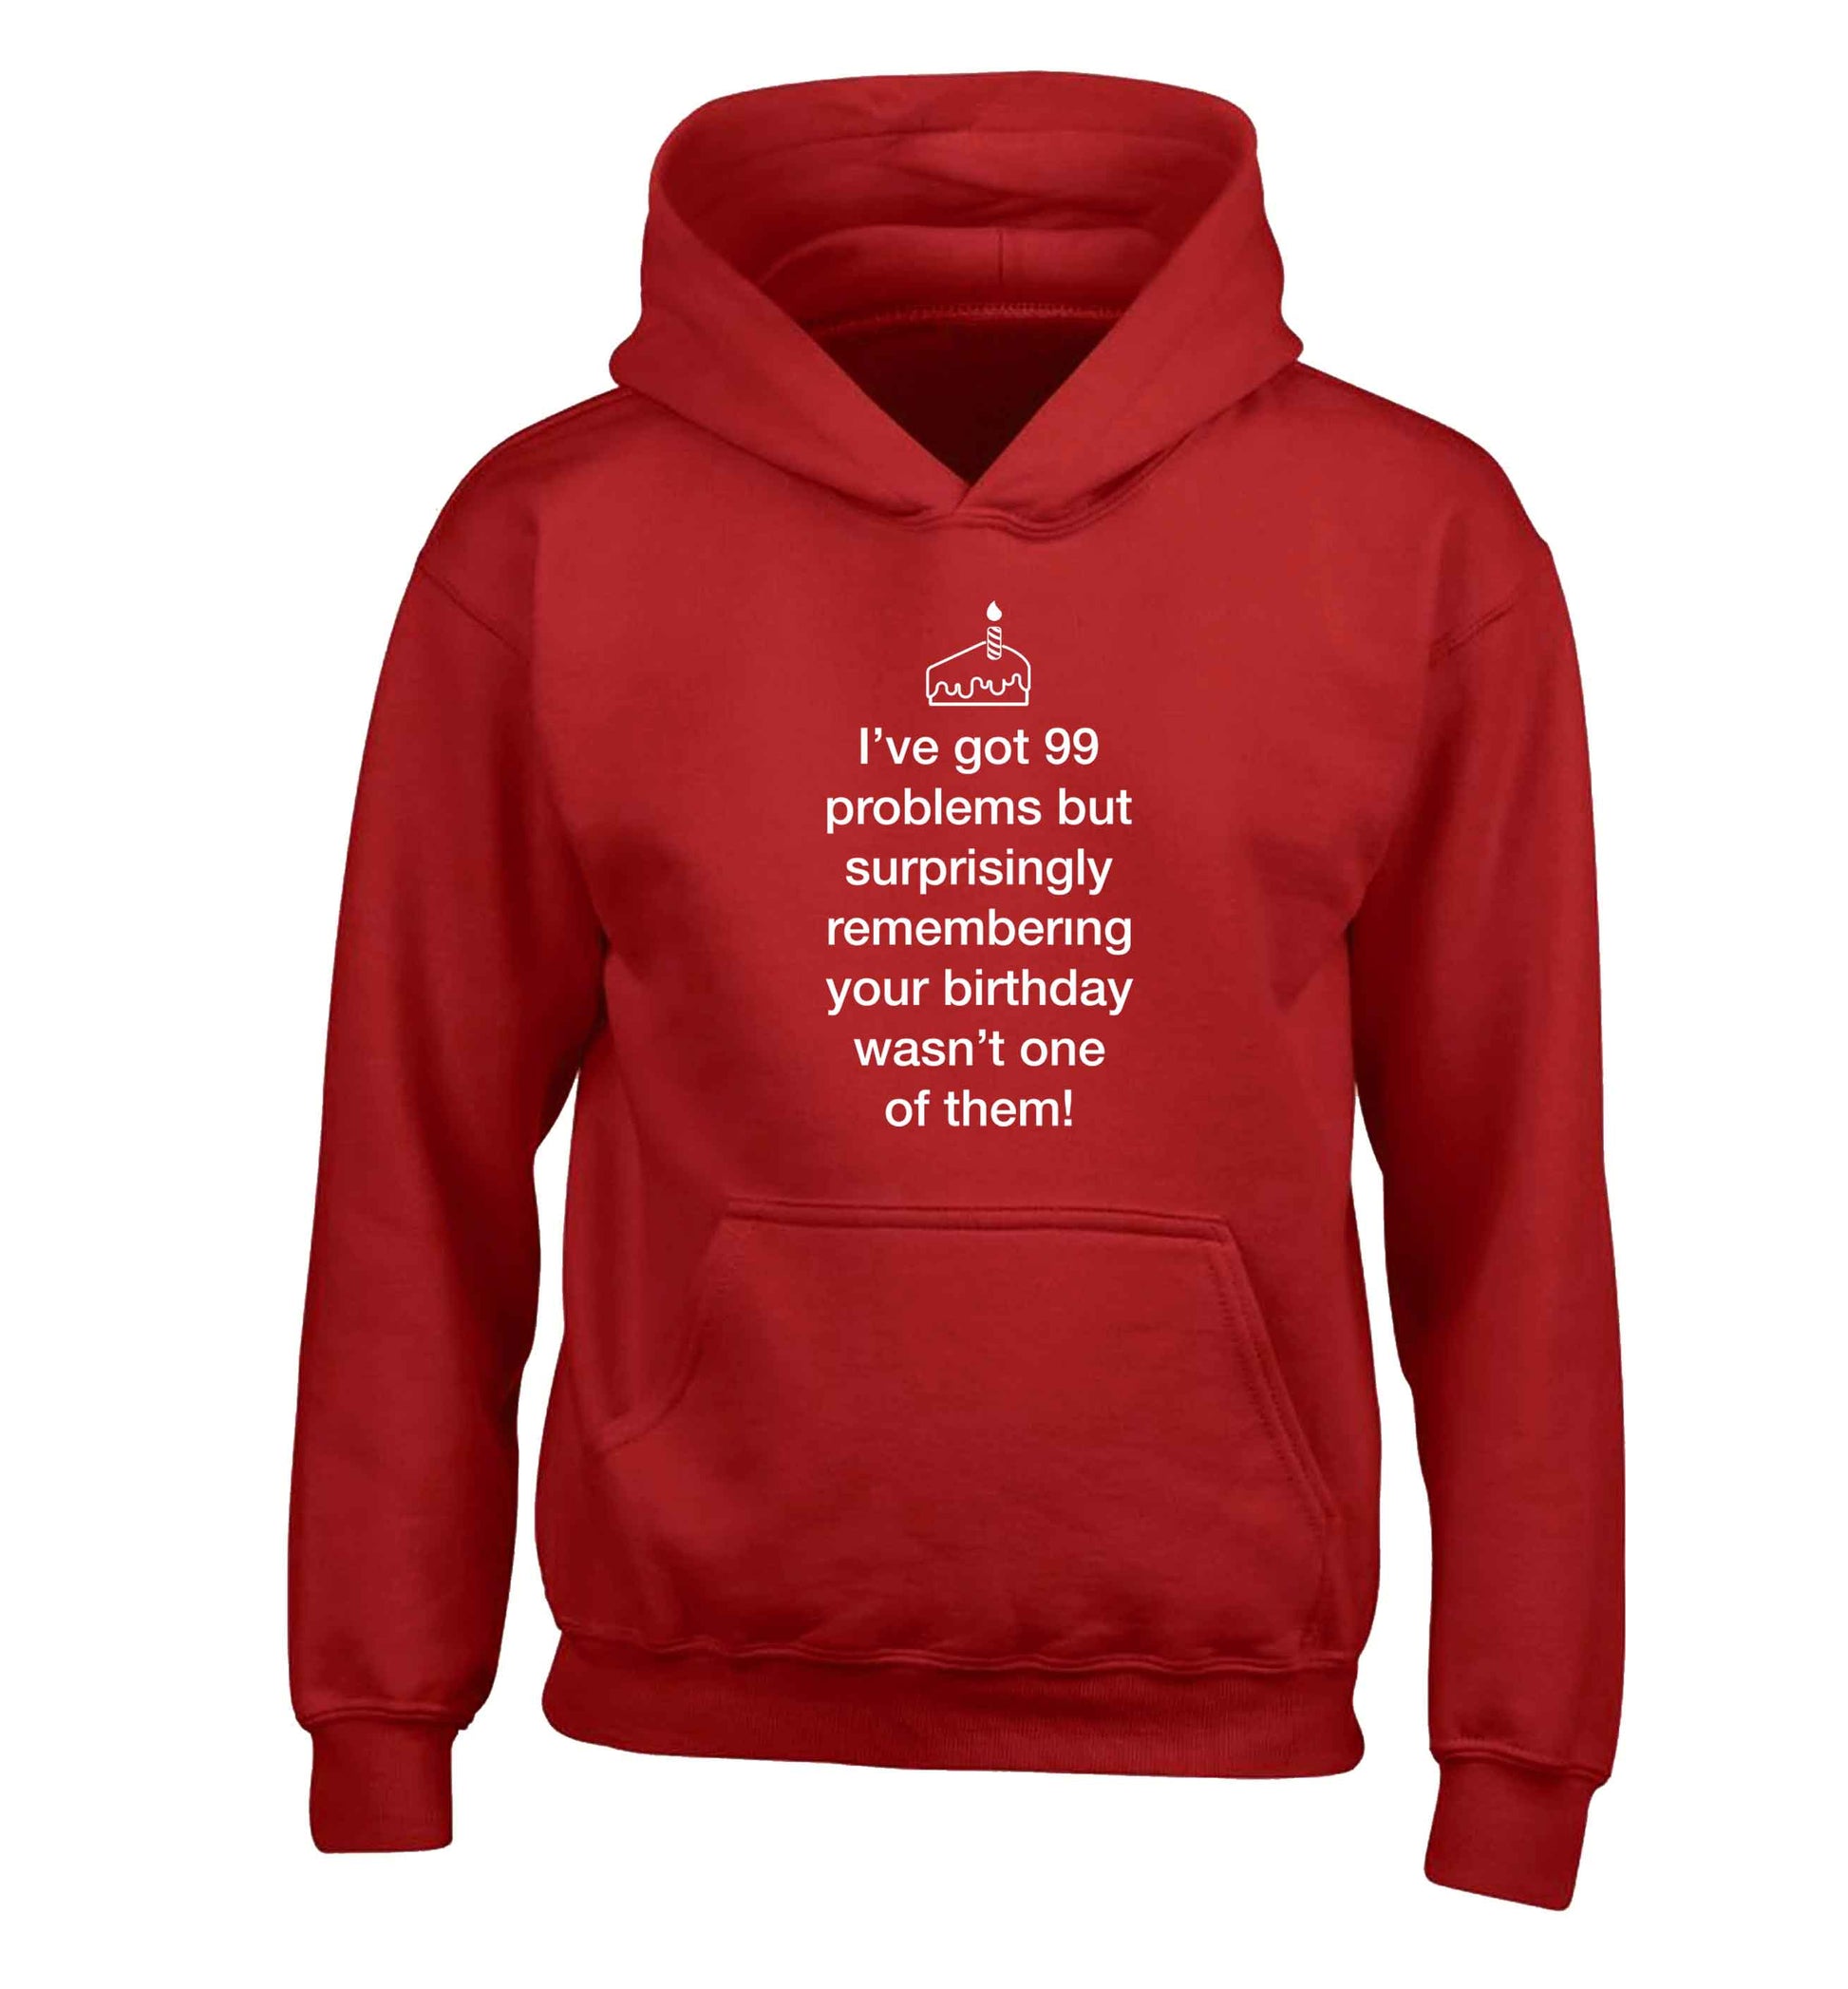 I've got 99 problems but surprisingly remembering your birthday wasn't one of them! children's red hoodie 12-13 Years